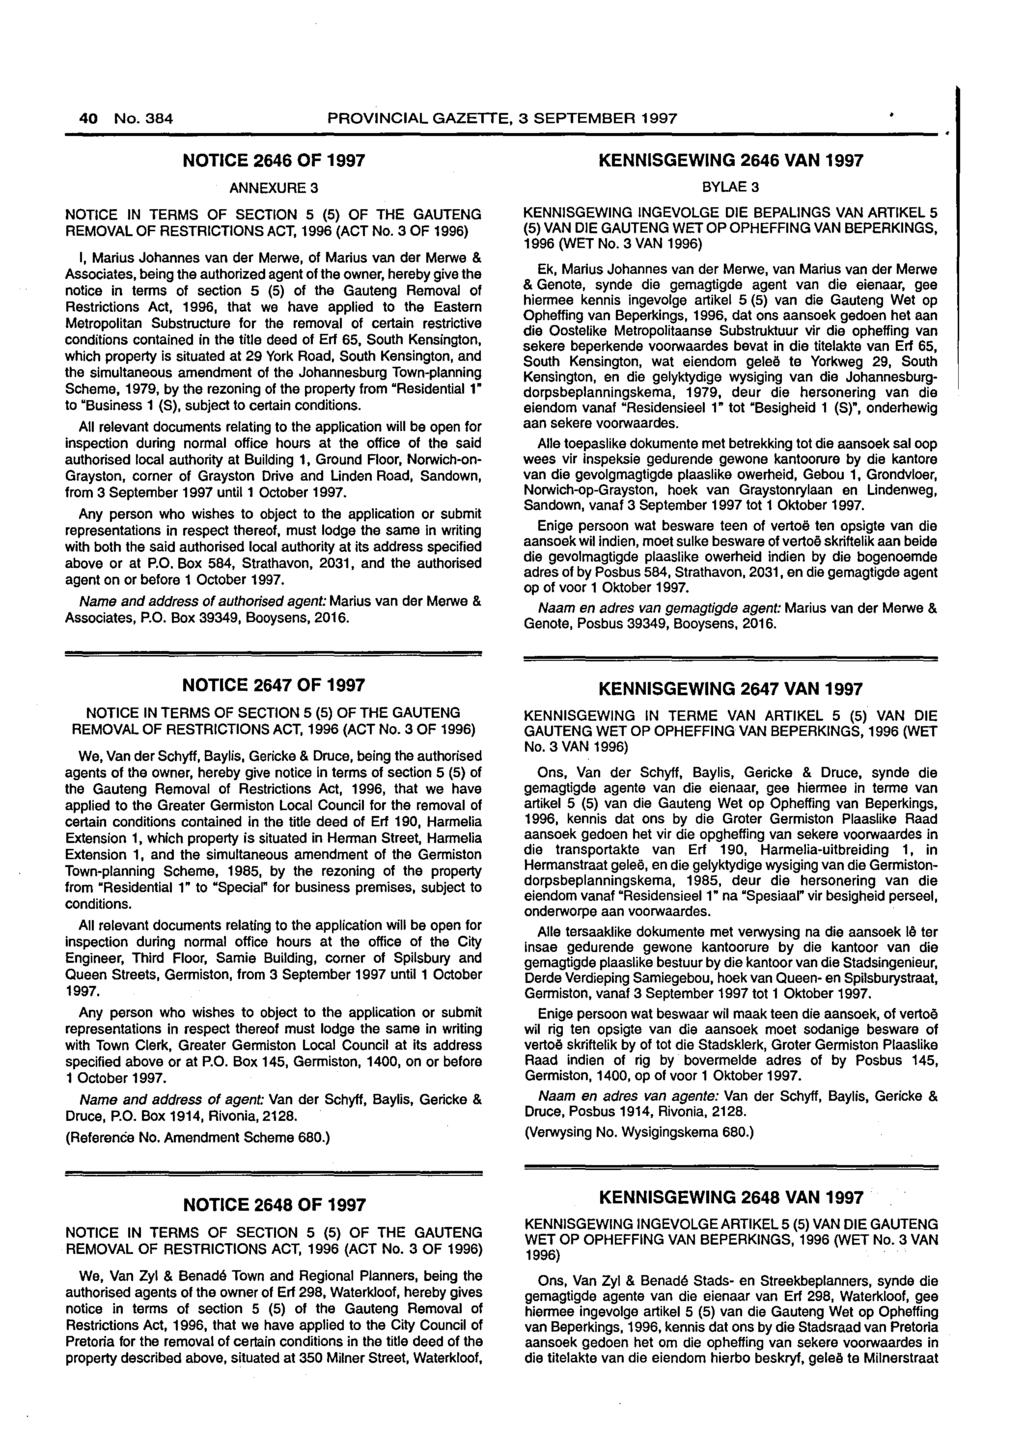 40 No. PROVINCIAL GAZElTE, 3 SEPTEMBER 1997 NOTICE 2646 OF 1997 ANNEXURE3 NOTICE IN TERMS OF SECTION 5 (5) OF THE GAUTENG REMOVAL OF RESTRICTIONS ACT, 1996 (ACT No.